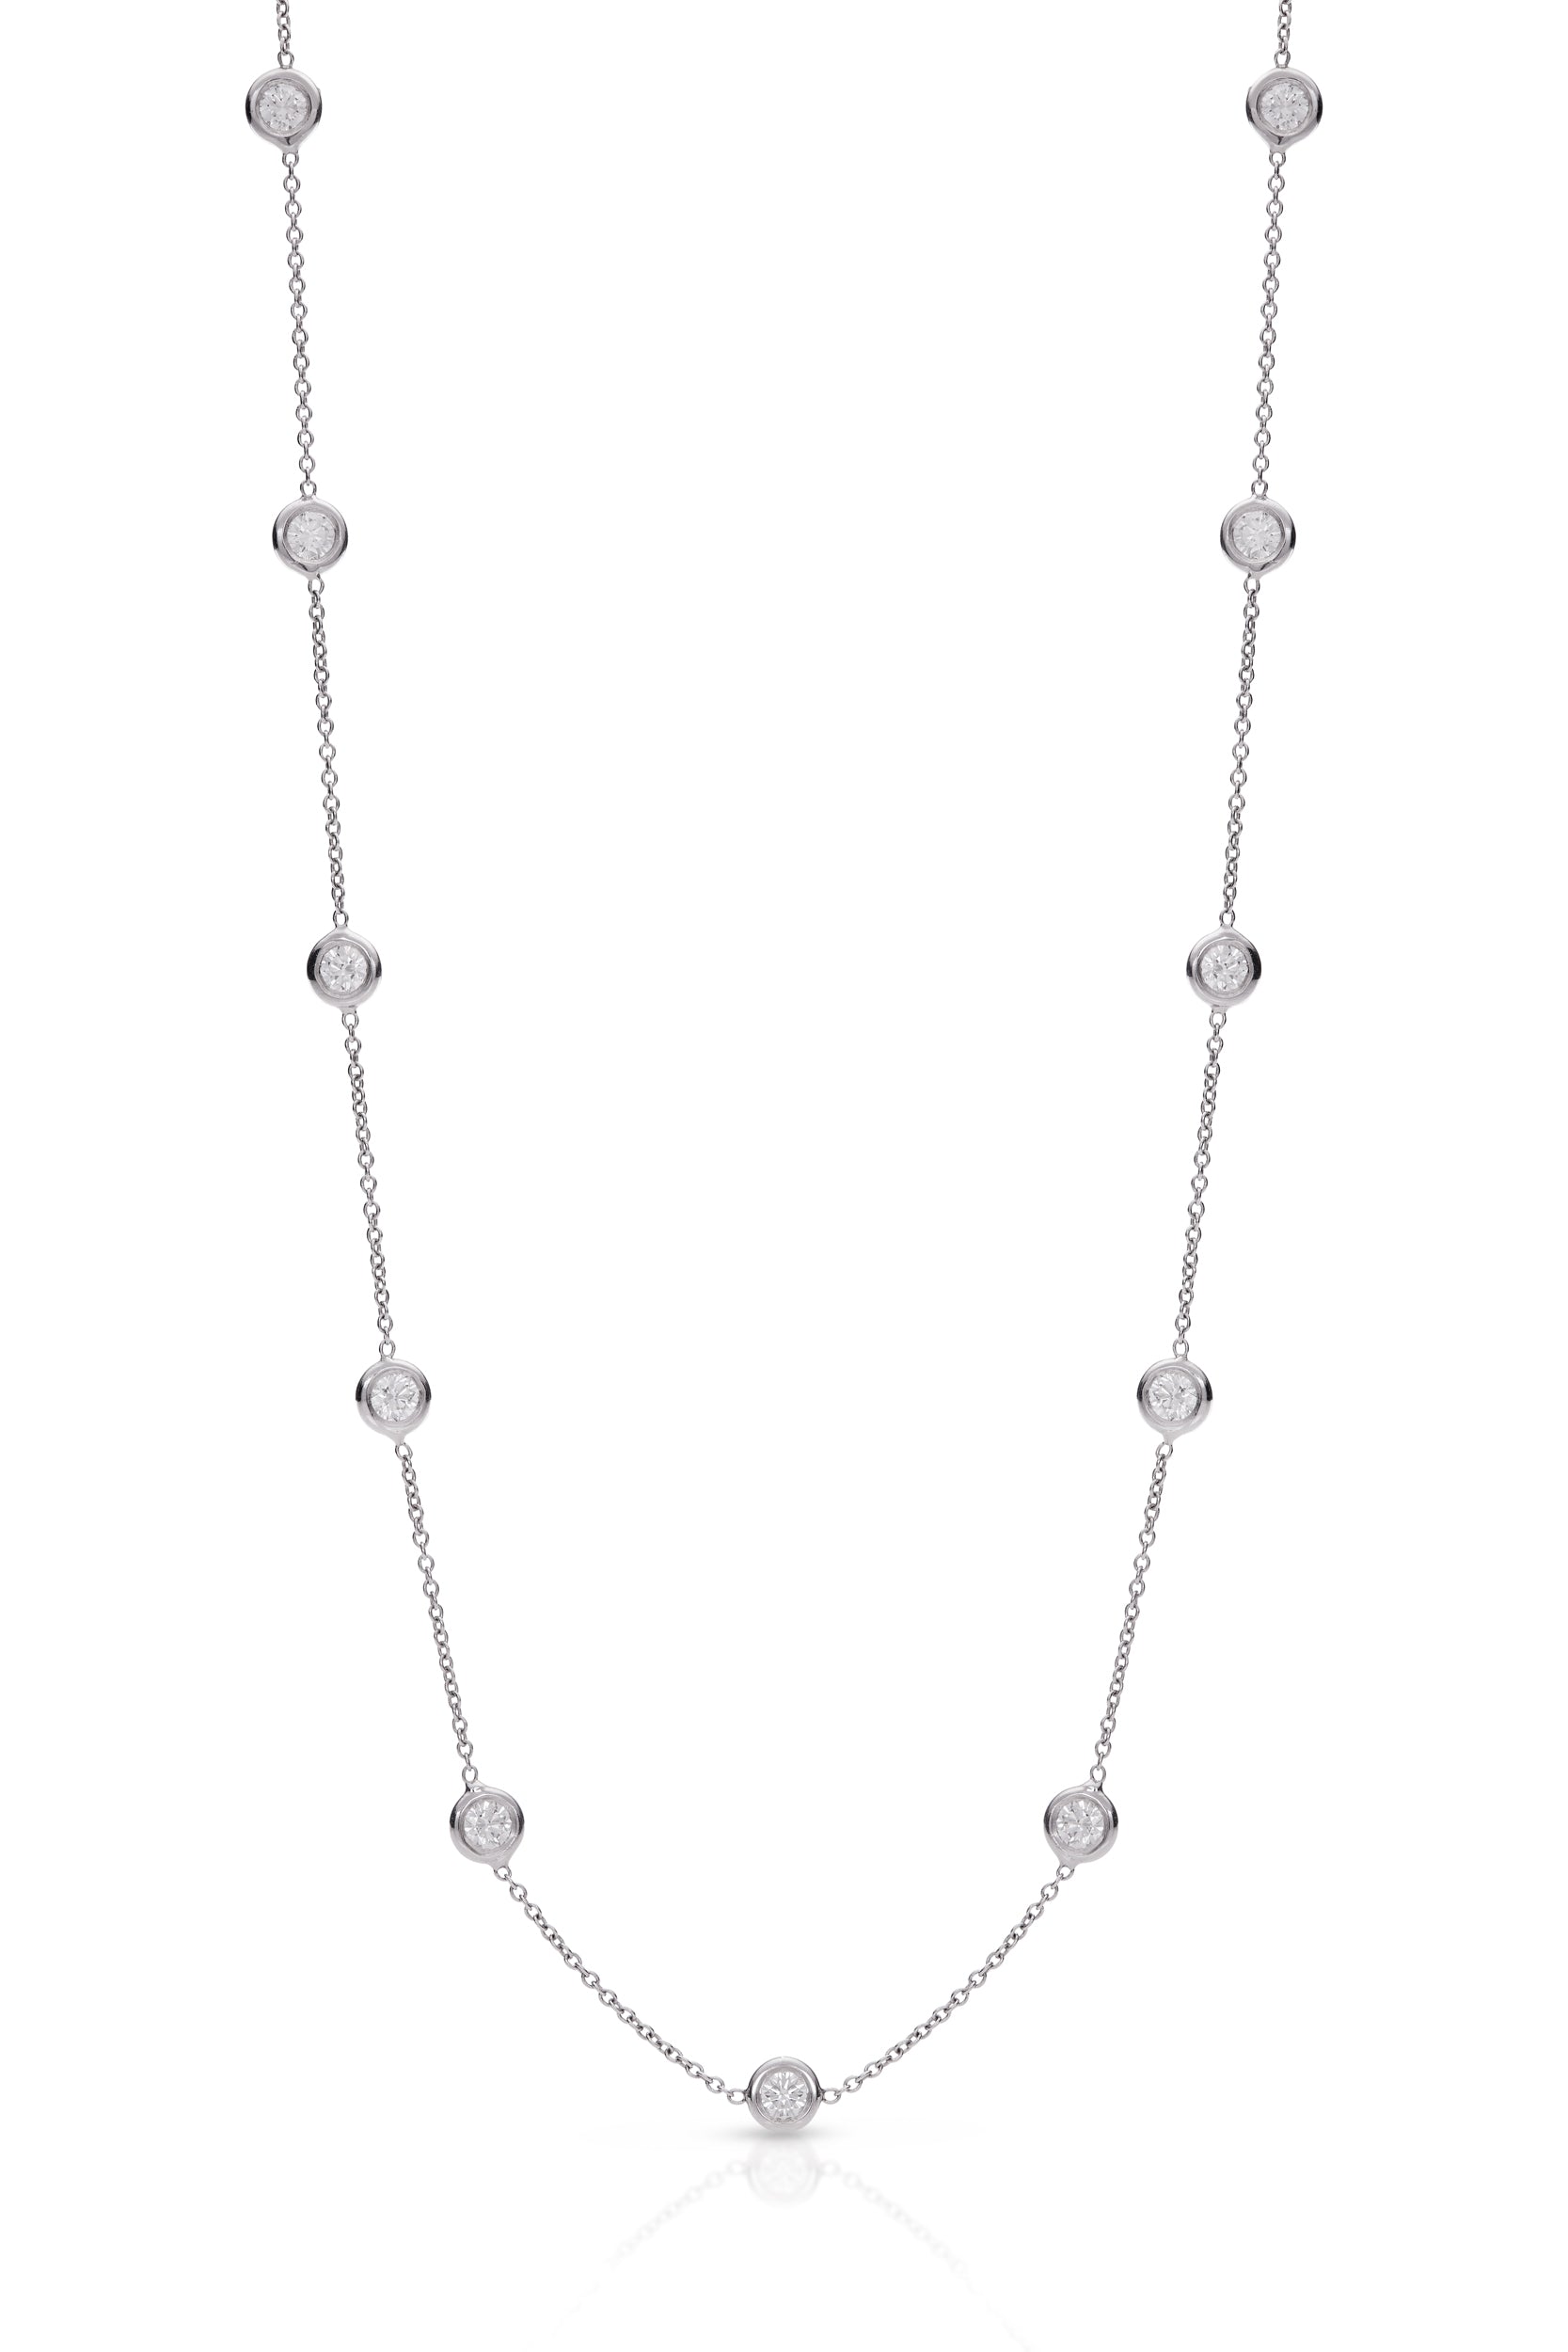 18K White Gold Diamonds by the Yard Necklace